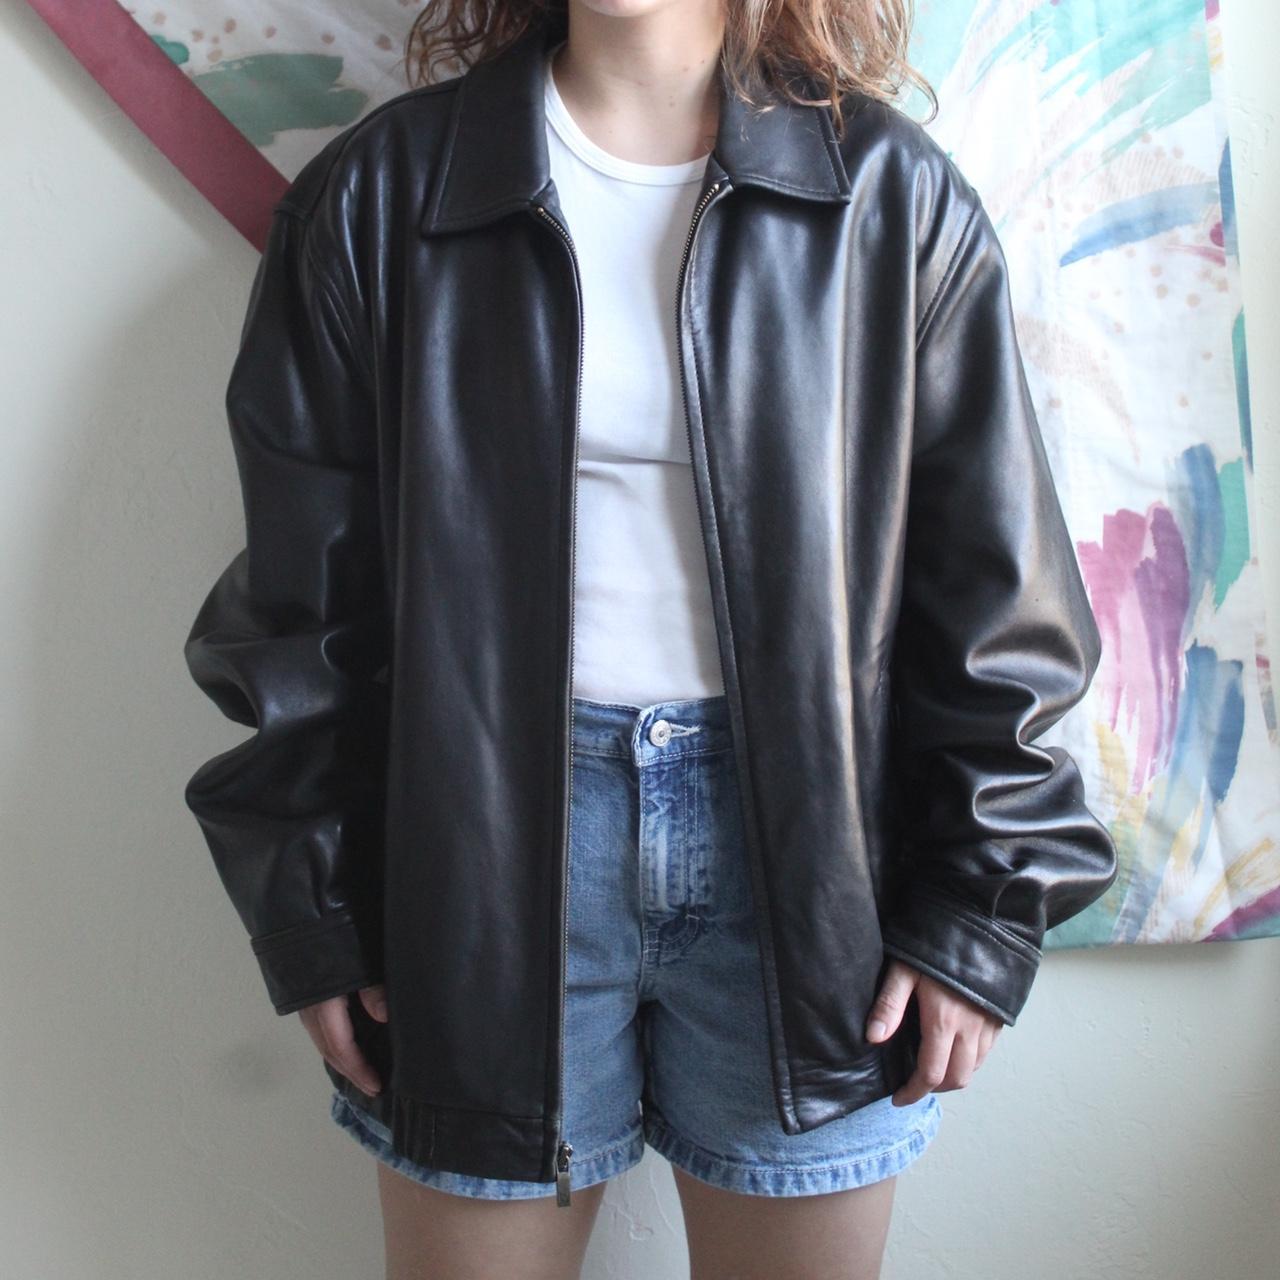 Buttery Leather Bomber Jacket 🖤 In beautiful... - Depop